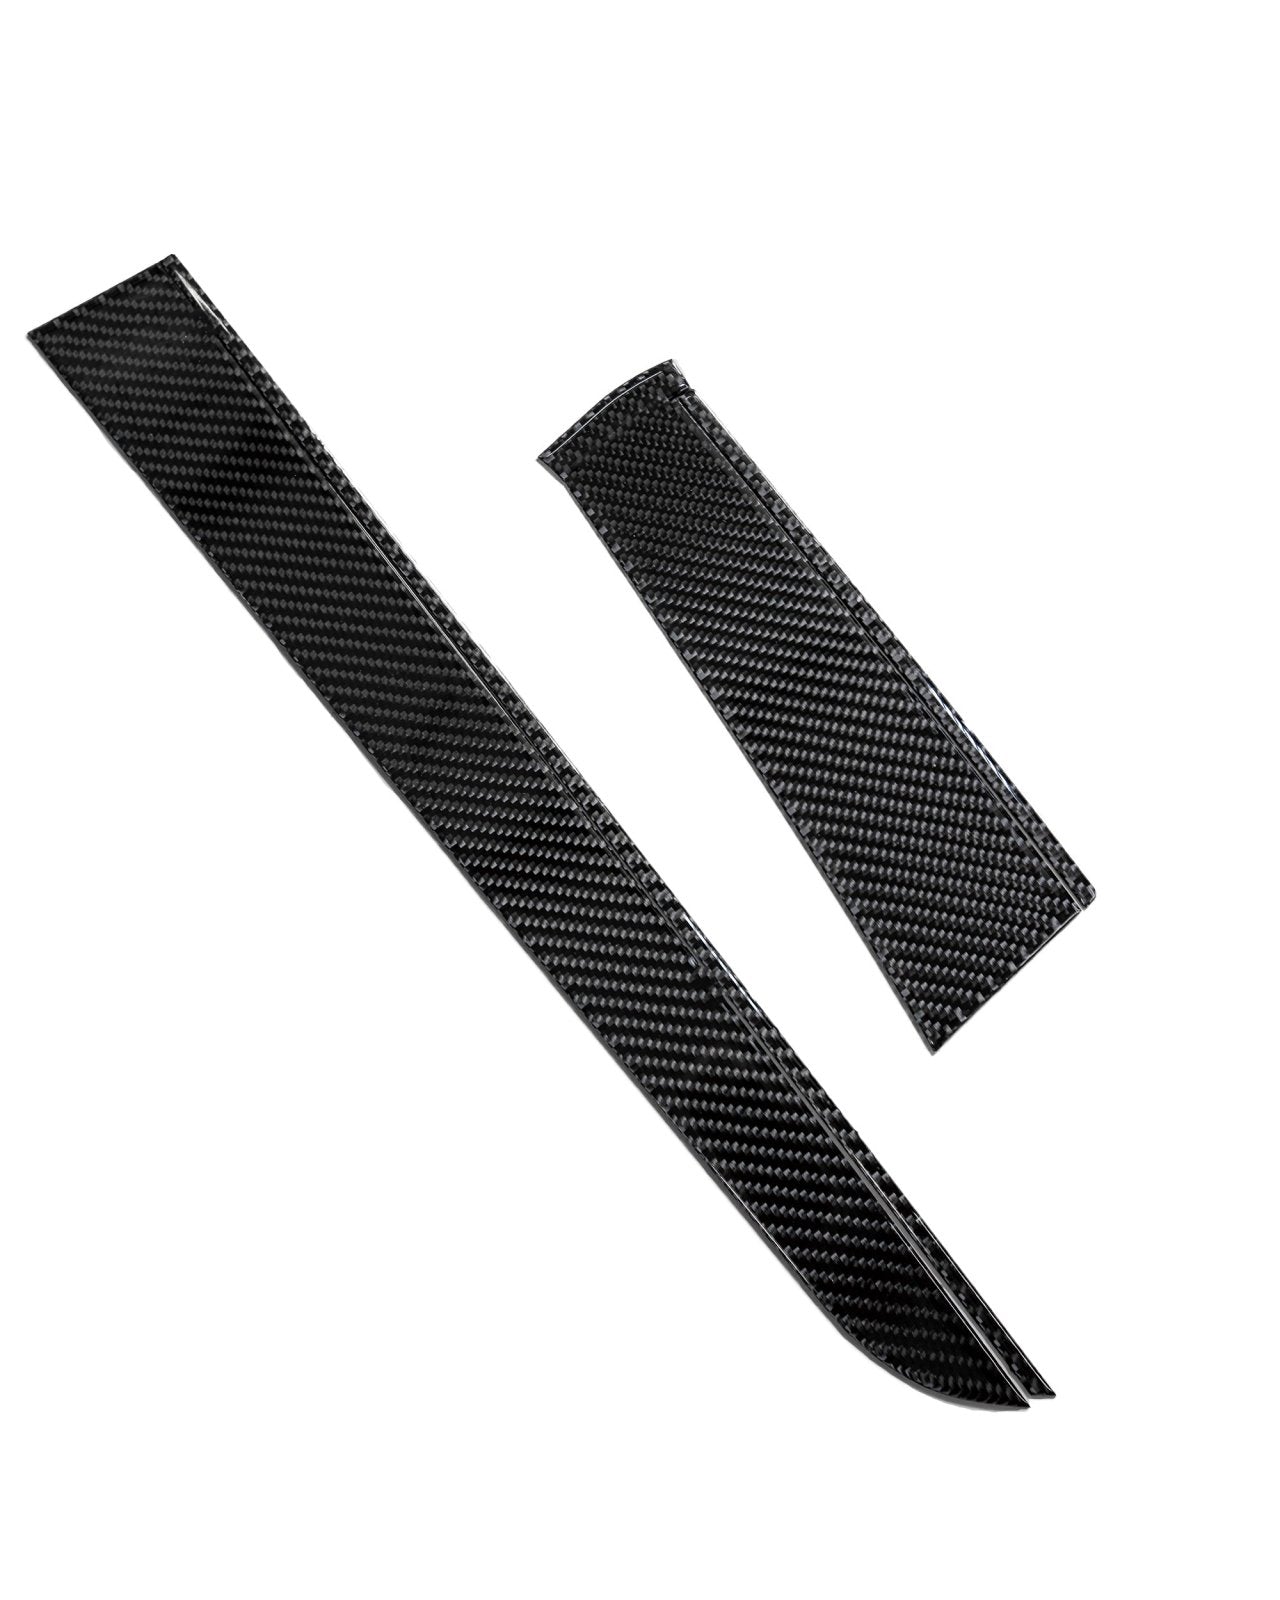 For 2022 2023 Carbon Fiber Front Dashboard Cover Frame Sticker Car Styling  Rhd